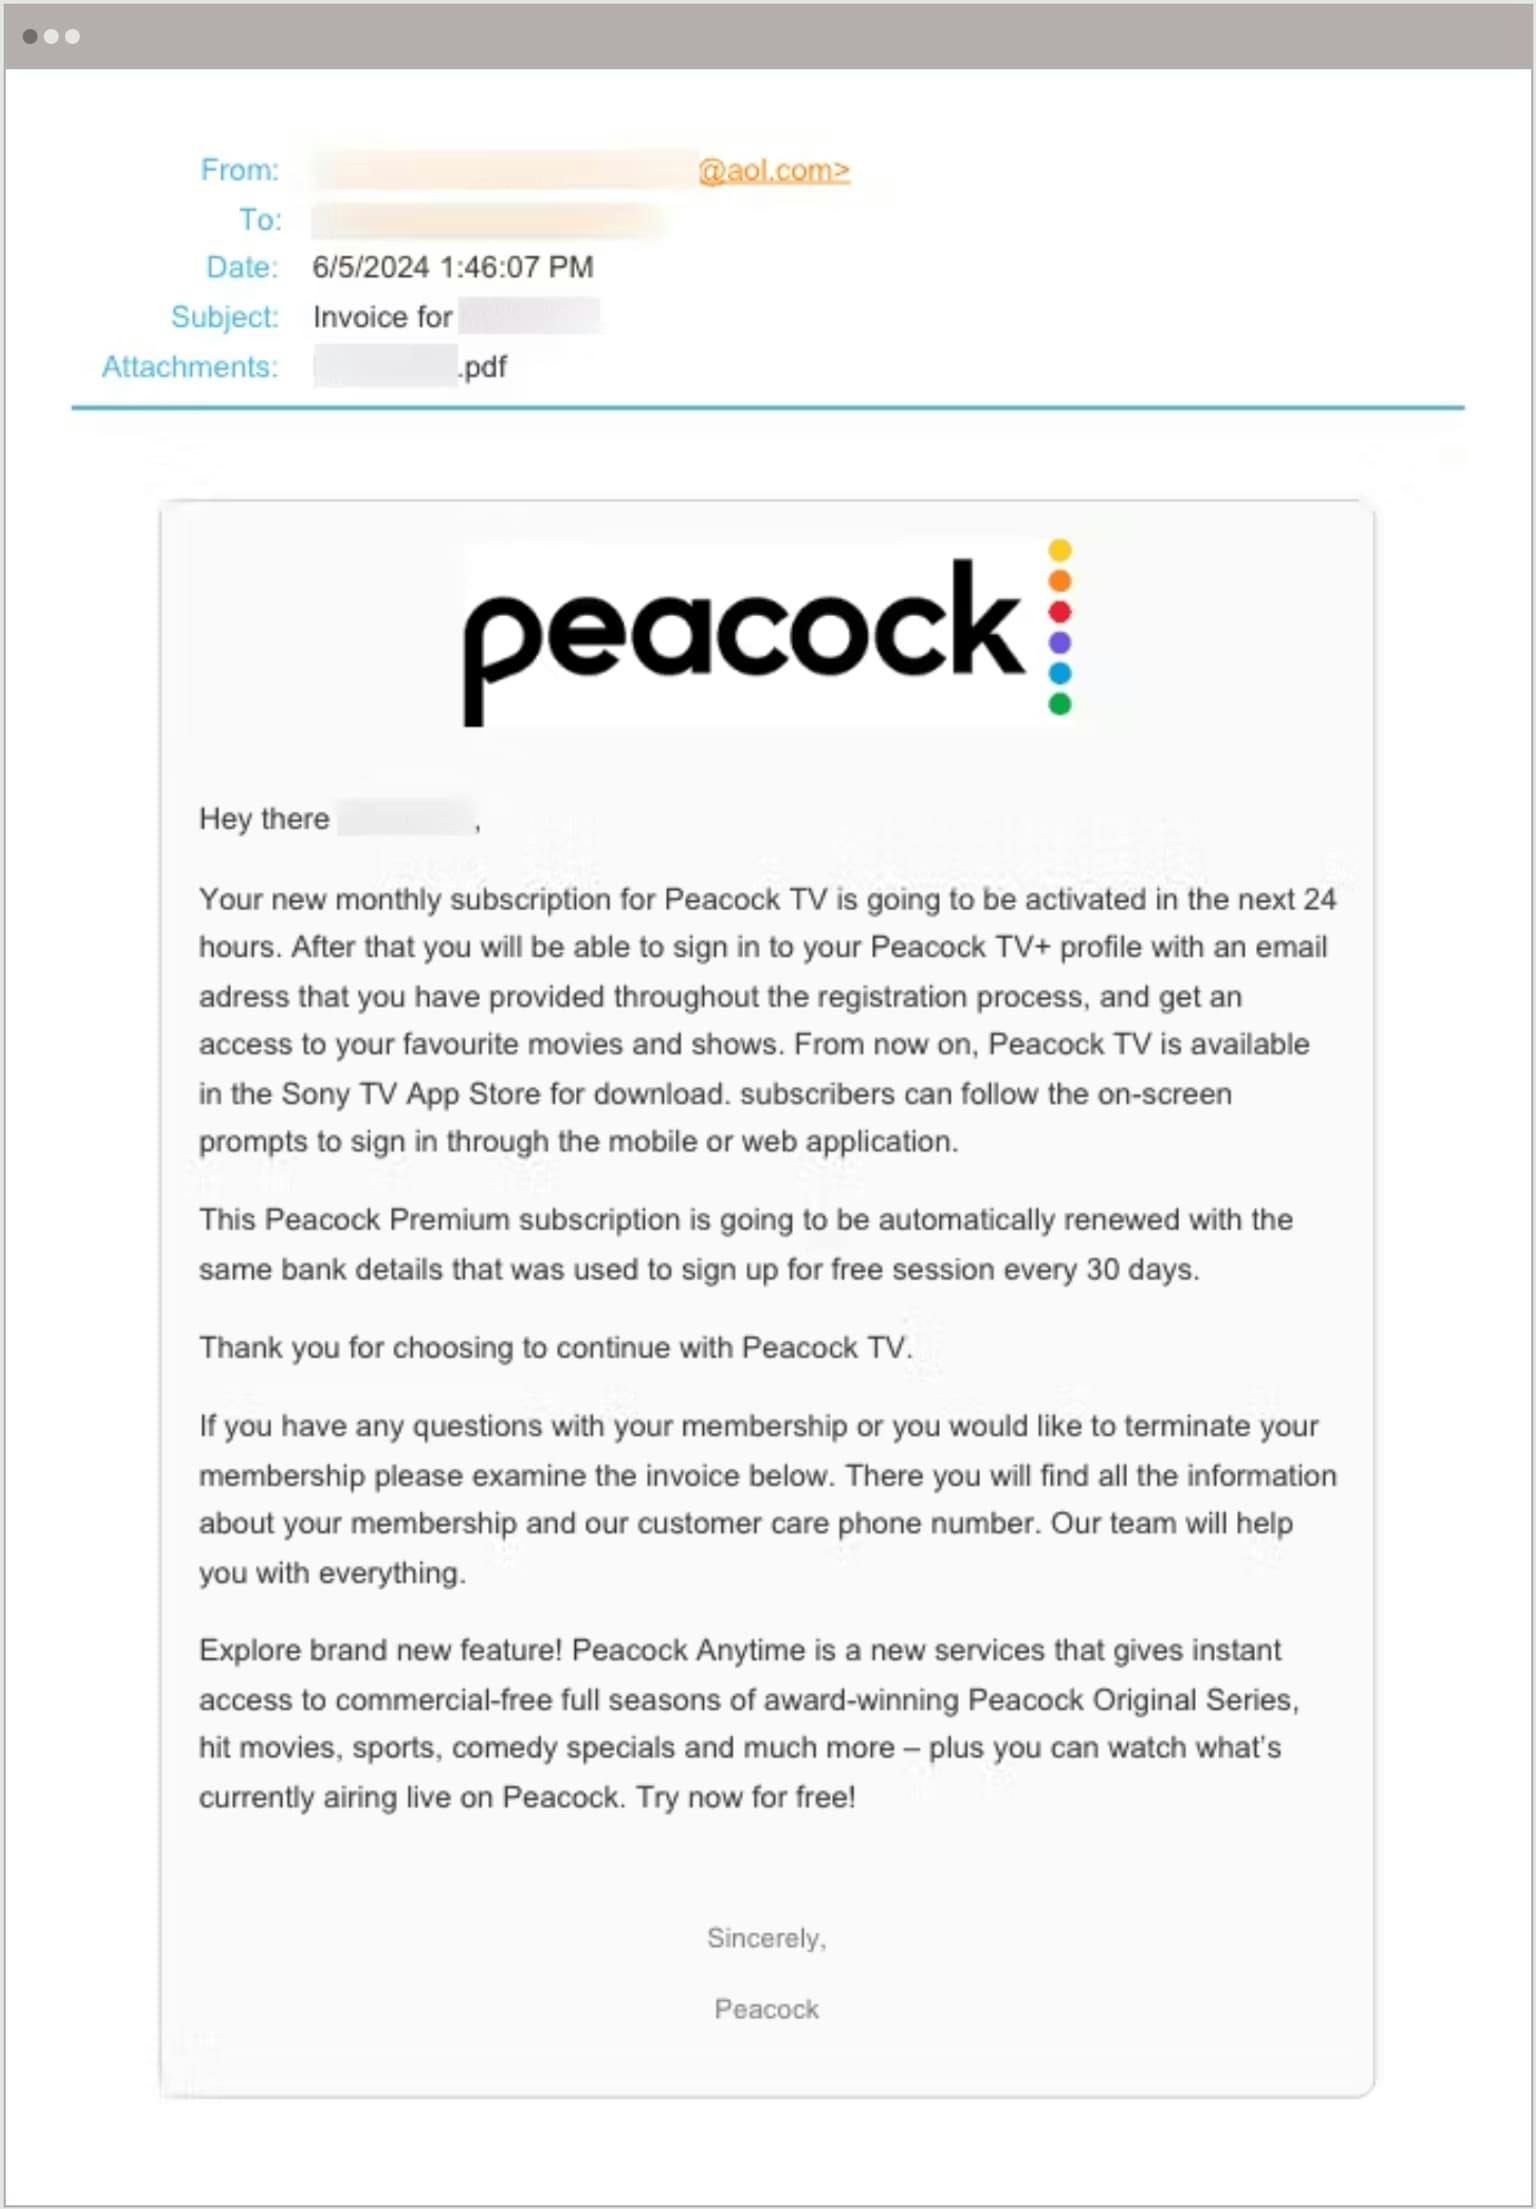 Q2 2024 Attacks Peacock Impersonation Email F